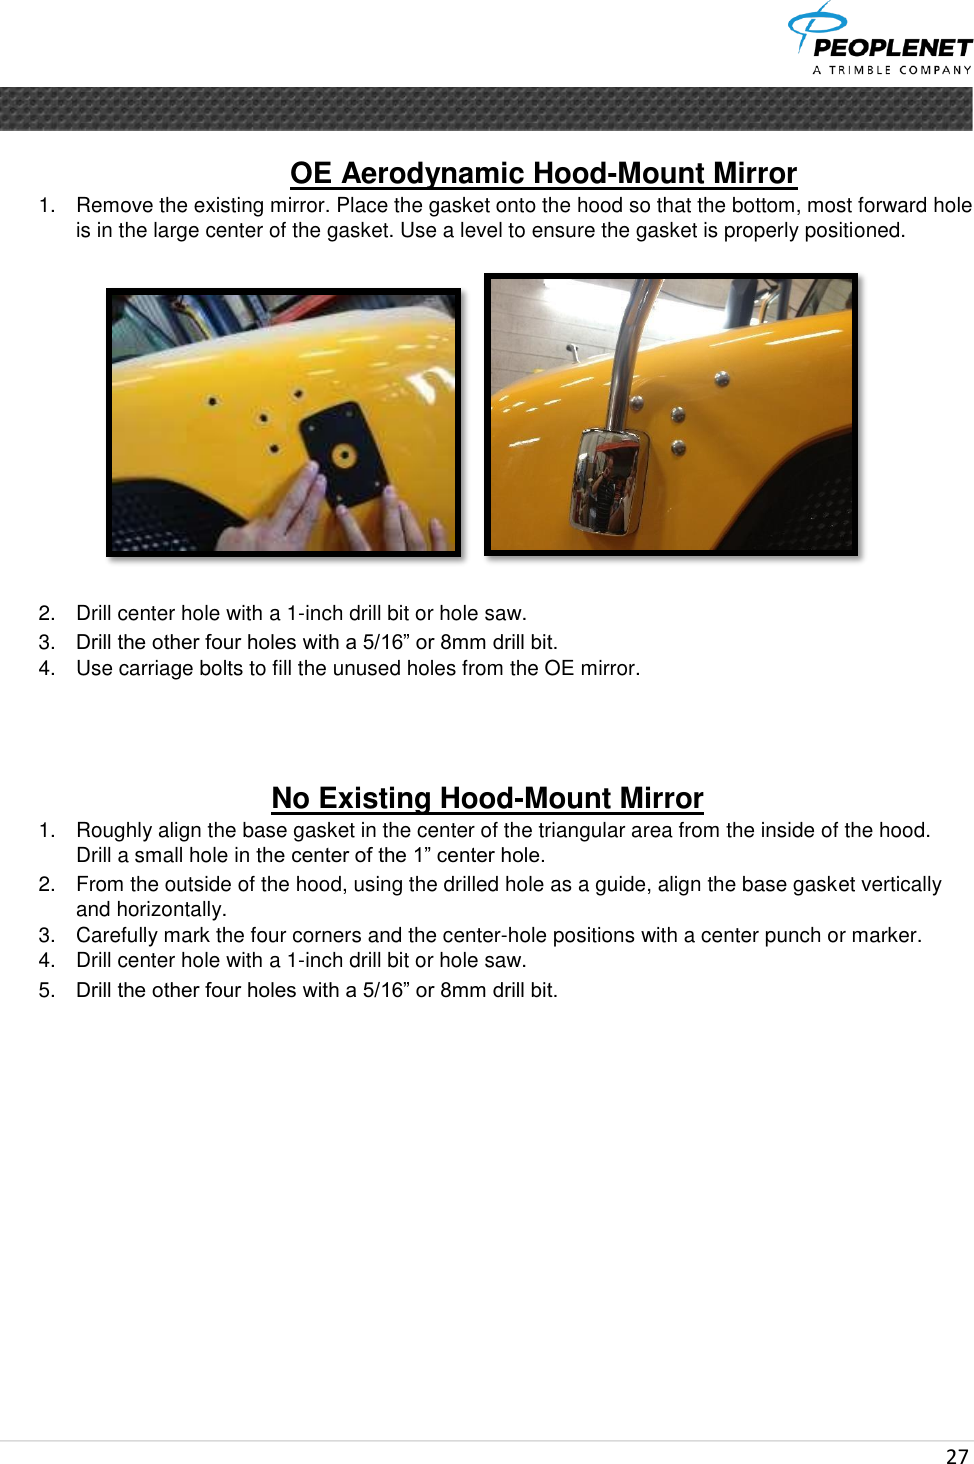  27      OE Aerodynamic Hood-Mount Mirror  1.  Remove the existing mirror. Place the gasket onto the hood so that the bottom, most forward hole is in the large center of the gasket. Use a level to ensure the gasket is properly positioned.  2.  Drill center hole with a 1-inch drill bit or hole saw. 3. Drill the other four holes with a 5/16” or 8mm drill bit. 4.  Use carriage bolts to fill the unused holes from the OE mirror.    No Existing Hood-Mount Mirror 1.  Roughly align the base gasket in the center of the triangular area from the inside of the hood.  Drill a small hole in the center of the 1” center hole. 2.  From the outside of the hood, using the drilled hole as a guide, align the base gasket vertically and horizontally. 3.  Carefully mark the four corners and the center-hole positions with a center punch or marker. 4.  Drill center hole with a 1-inch drill bit or hole saw. 5. Drill the other four holes with a 5/16” or 8mm drill bit.        